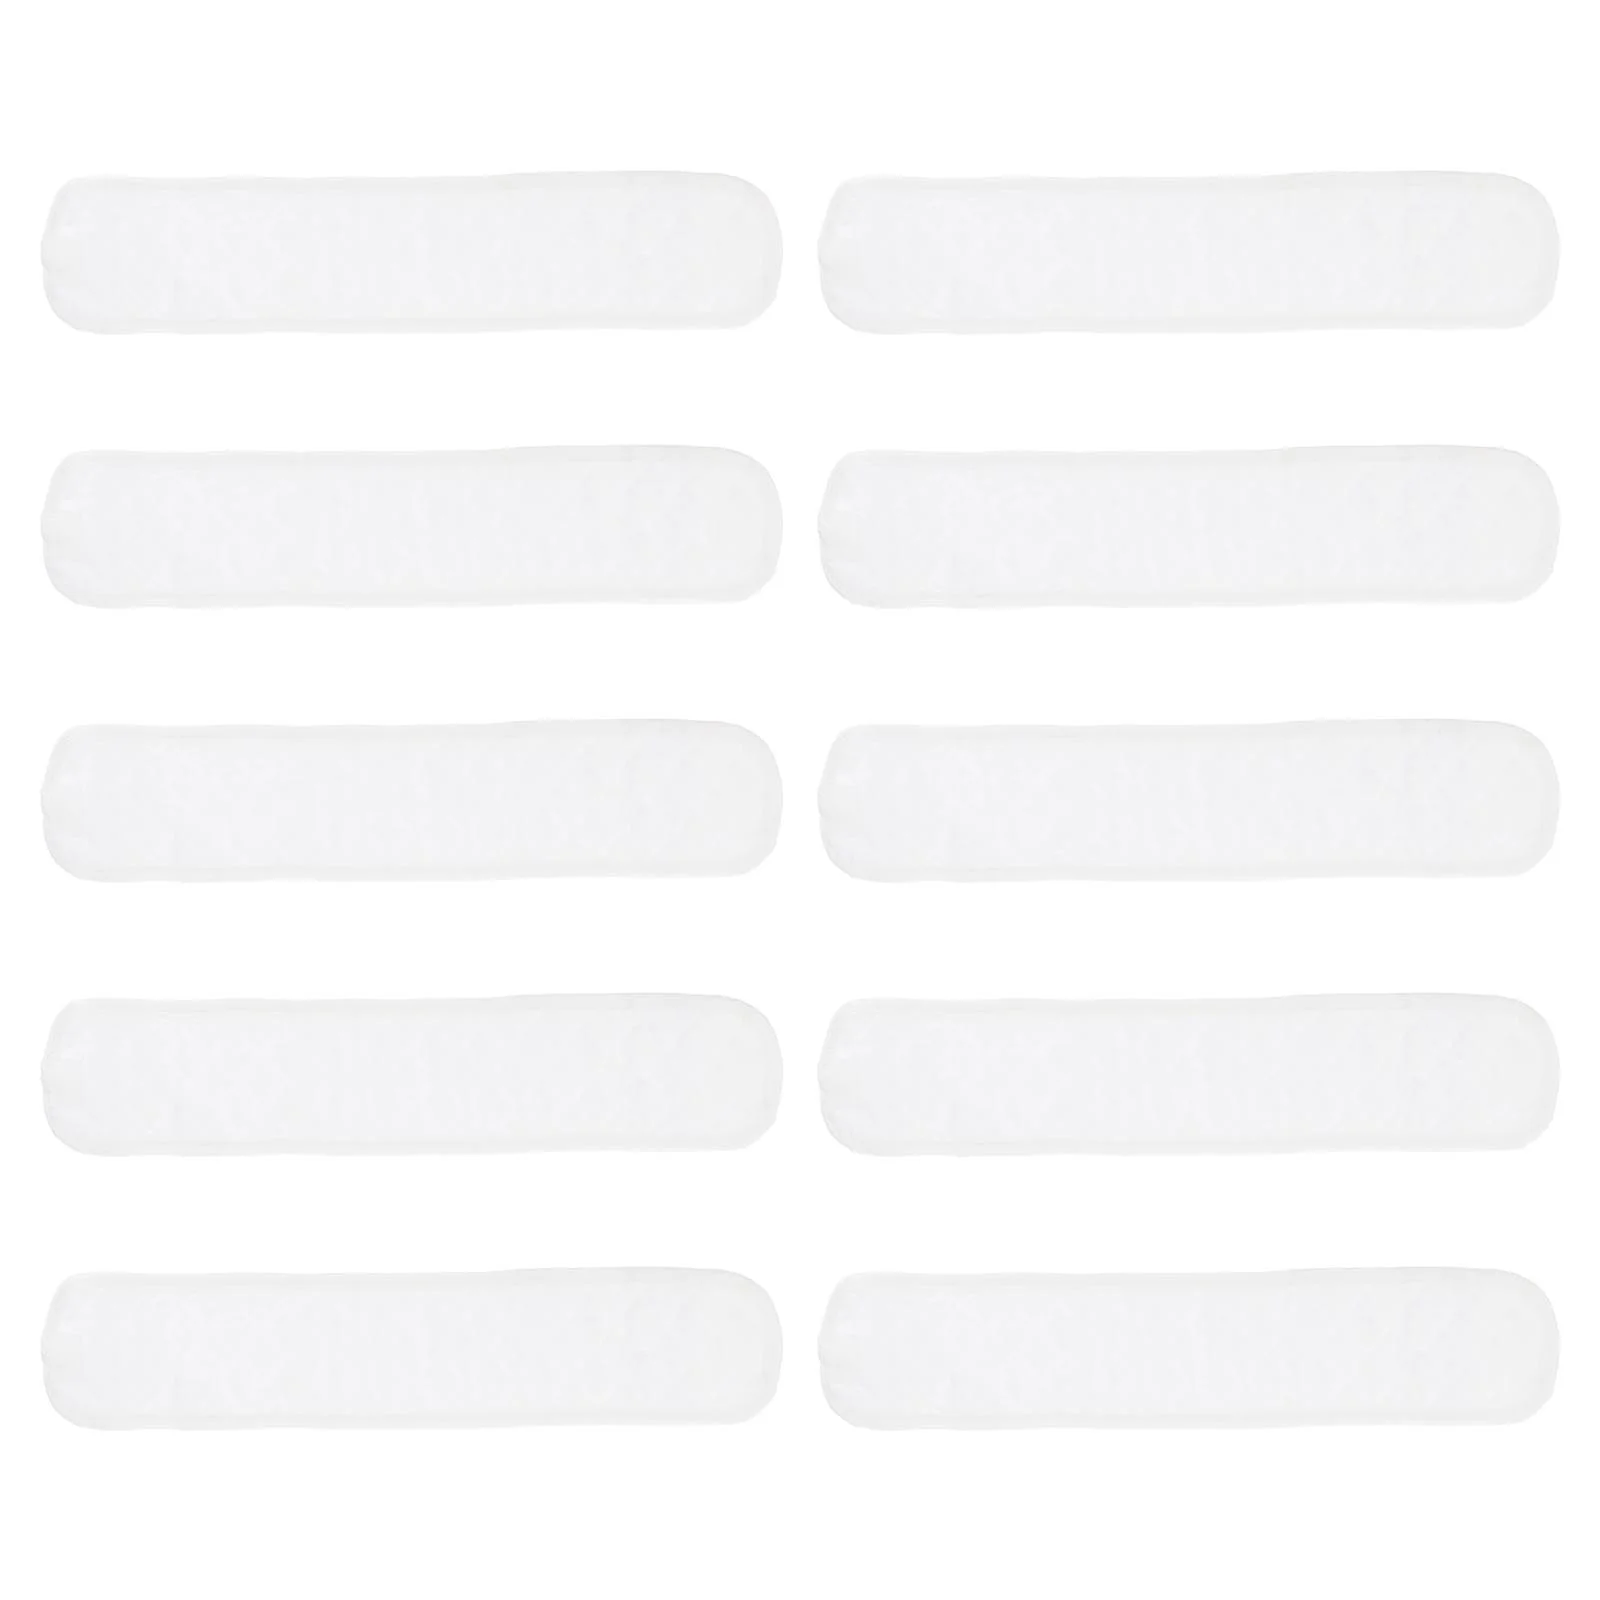 10Pcs infant navel belt Belly Band Cotton Umbilical Bands White Breathable Newborn Infant newborn belly band Bands infant belly latex waistband fitness sports belly band breathable weight control shaping thin belly